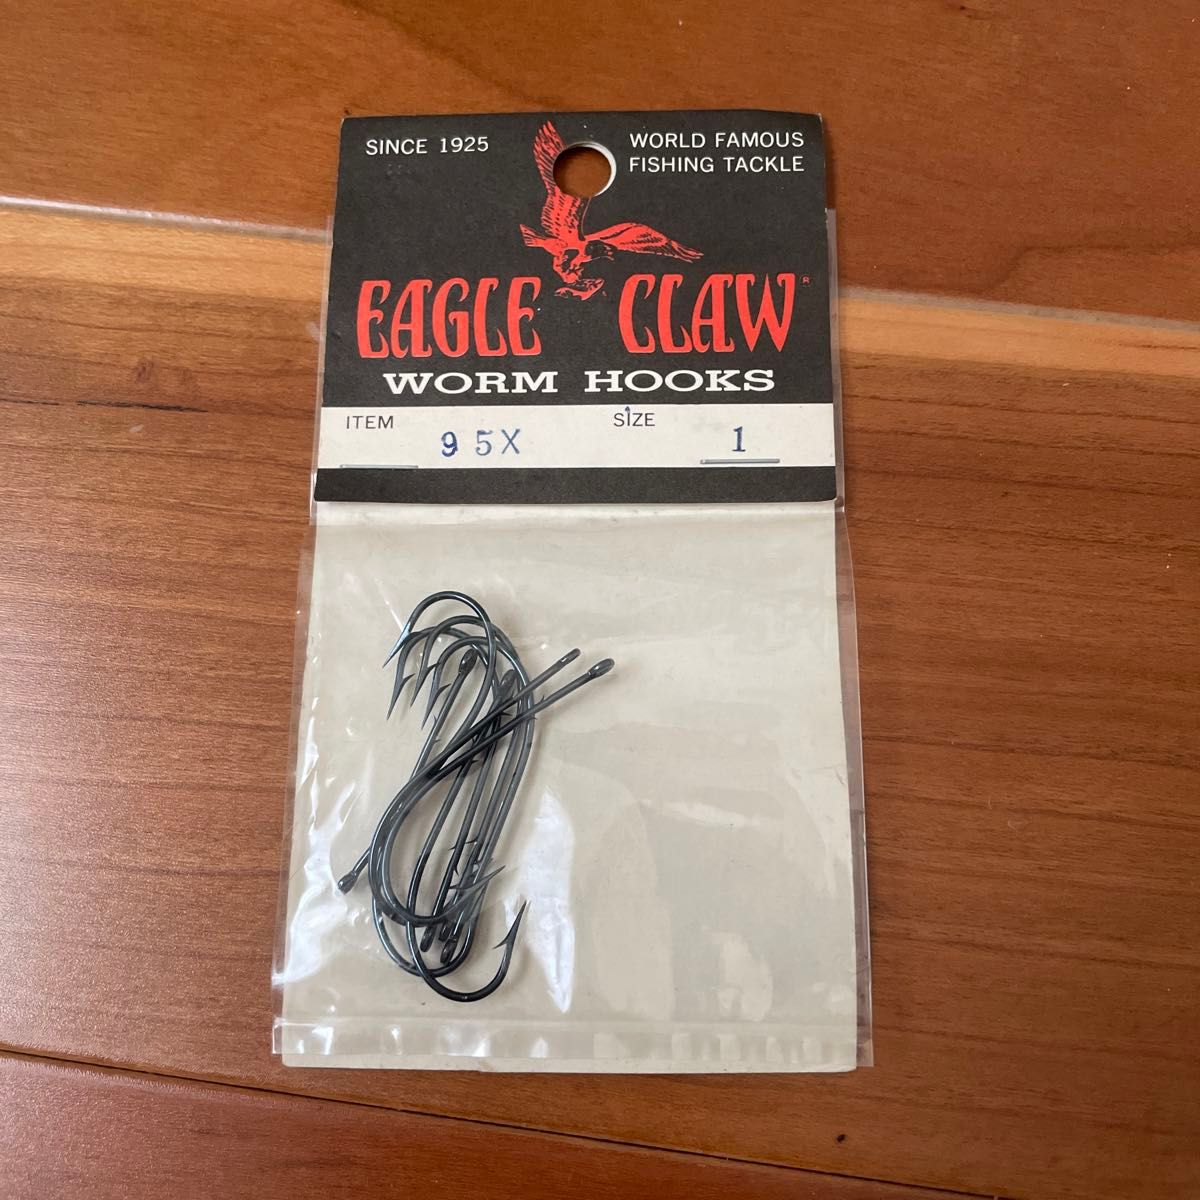 EAGLE CLAW 釣り針　ITEM 95x SIZE 1